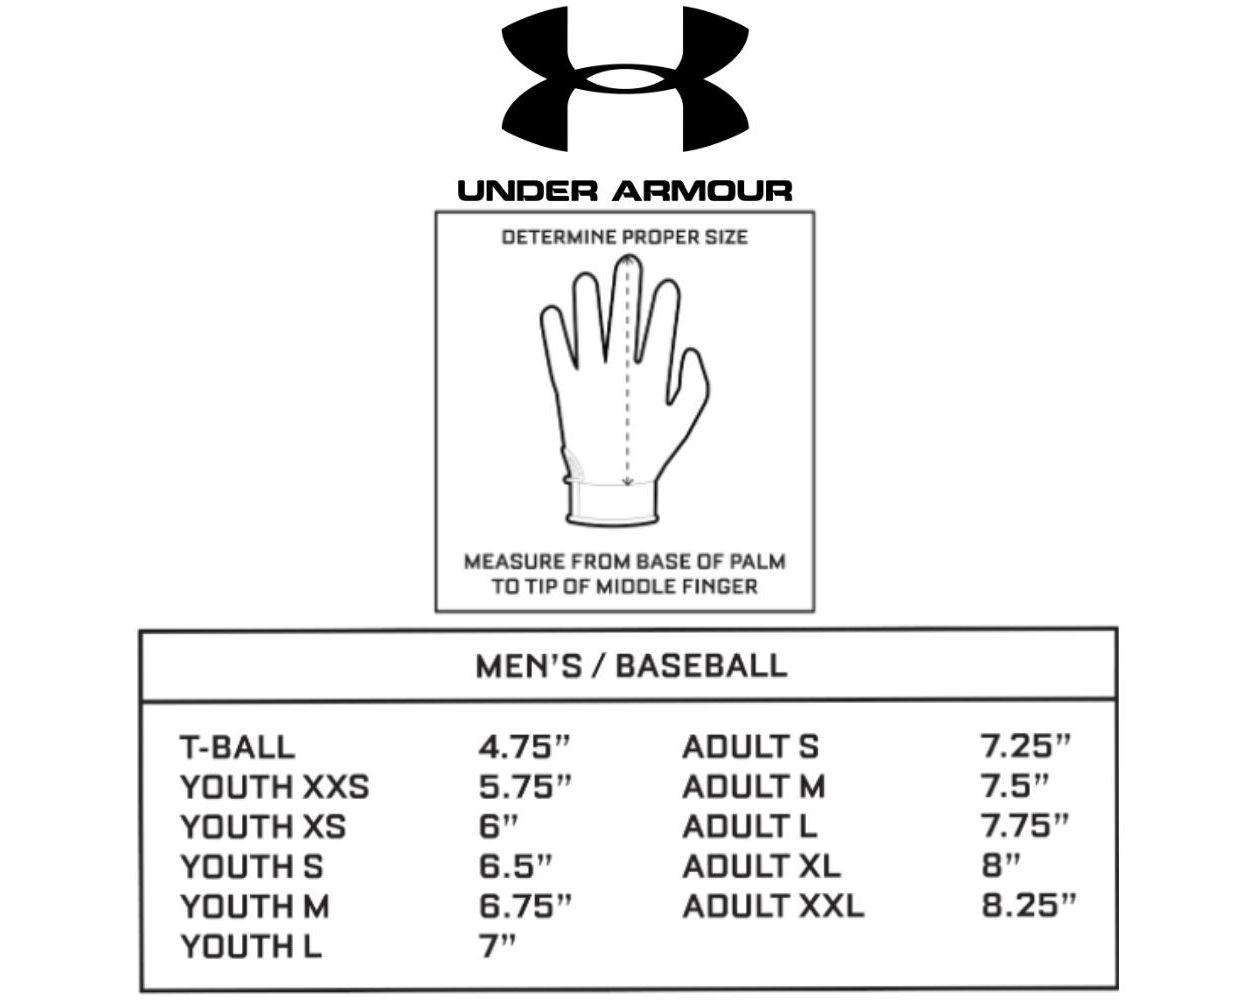 Under Armour Glove Size Chart | lupon.gov.ph